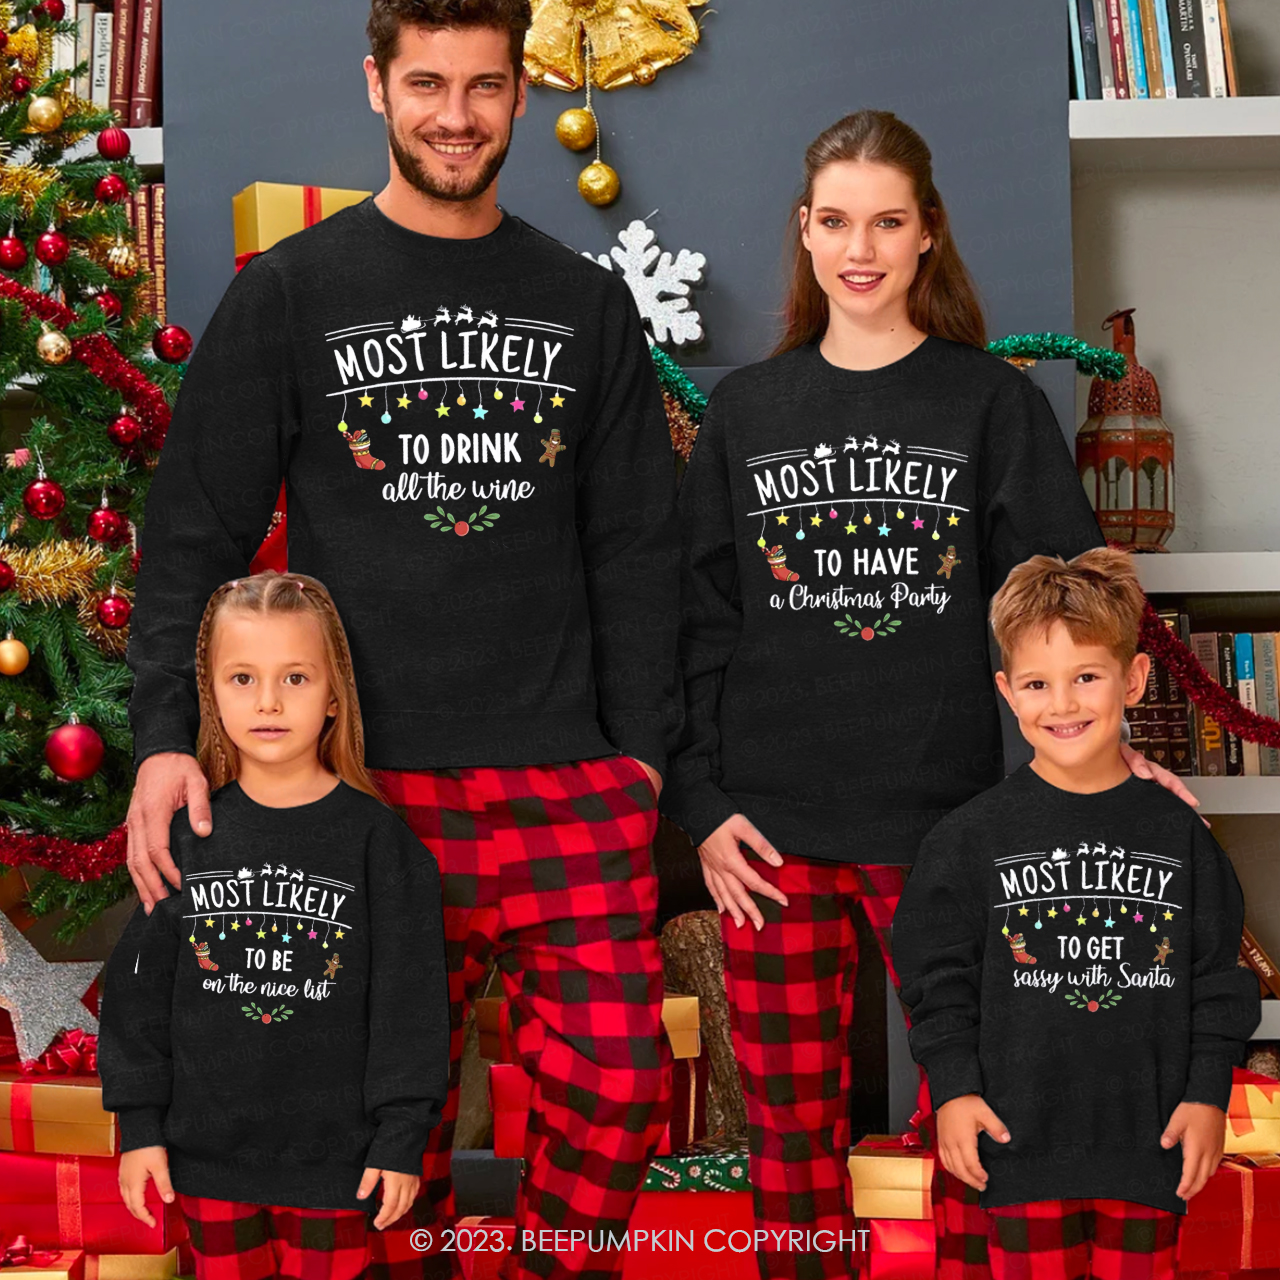 60 Quote Most Likely Family Christmas Matching Sweatshirts